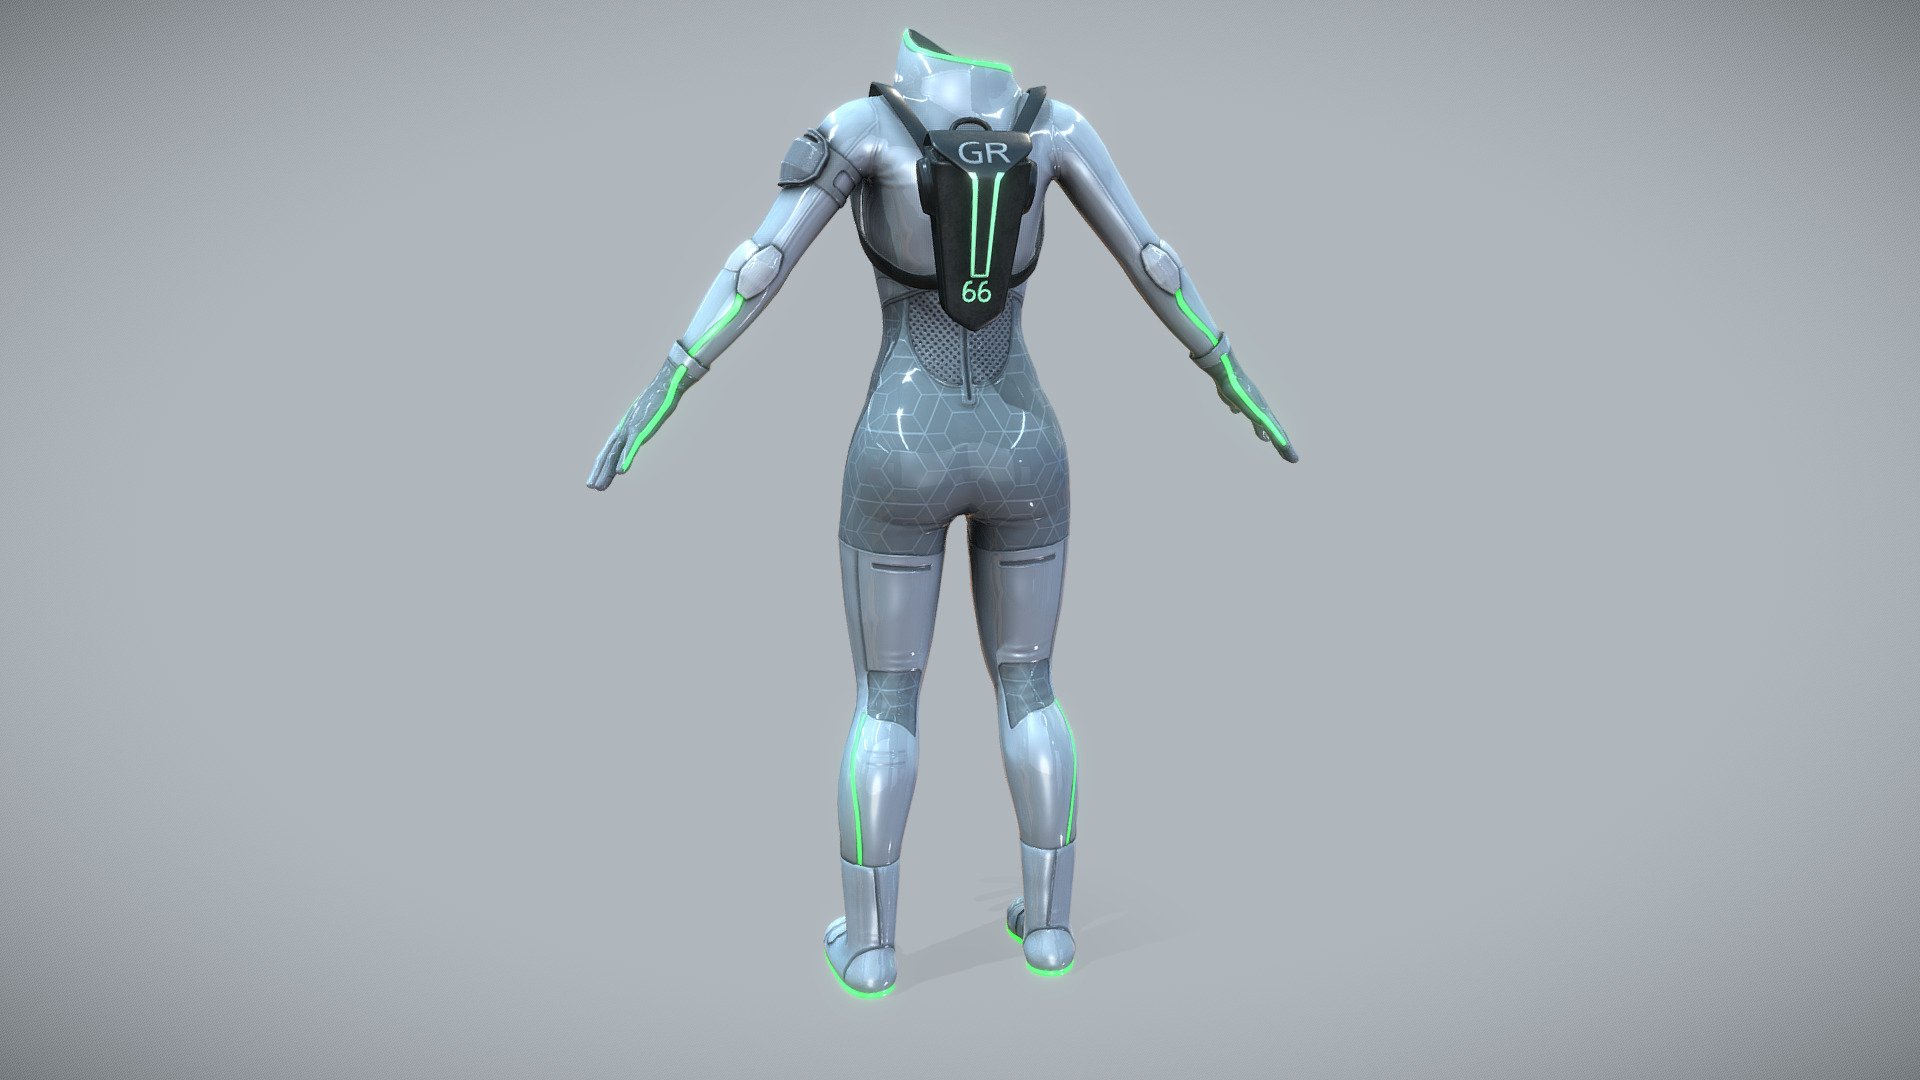 Bodysuit + Backpack

Can be fitted to any characte

Clean topology

No overlapping smart optimum unwrapped UVs

High-quality realistic textures

FBX, OBJ, gITF, USDZ (request other formats)

PBR or Classic

Type     user:3dia &ldquo;search term